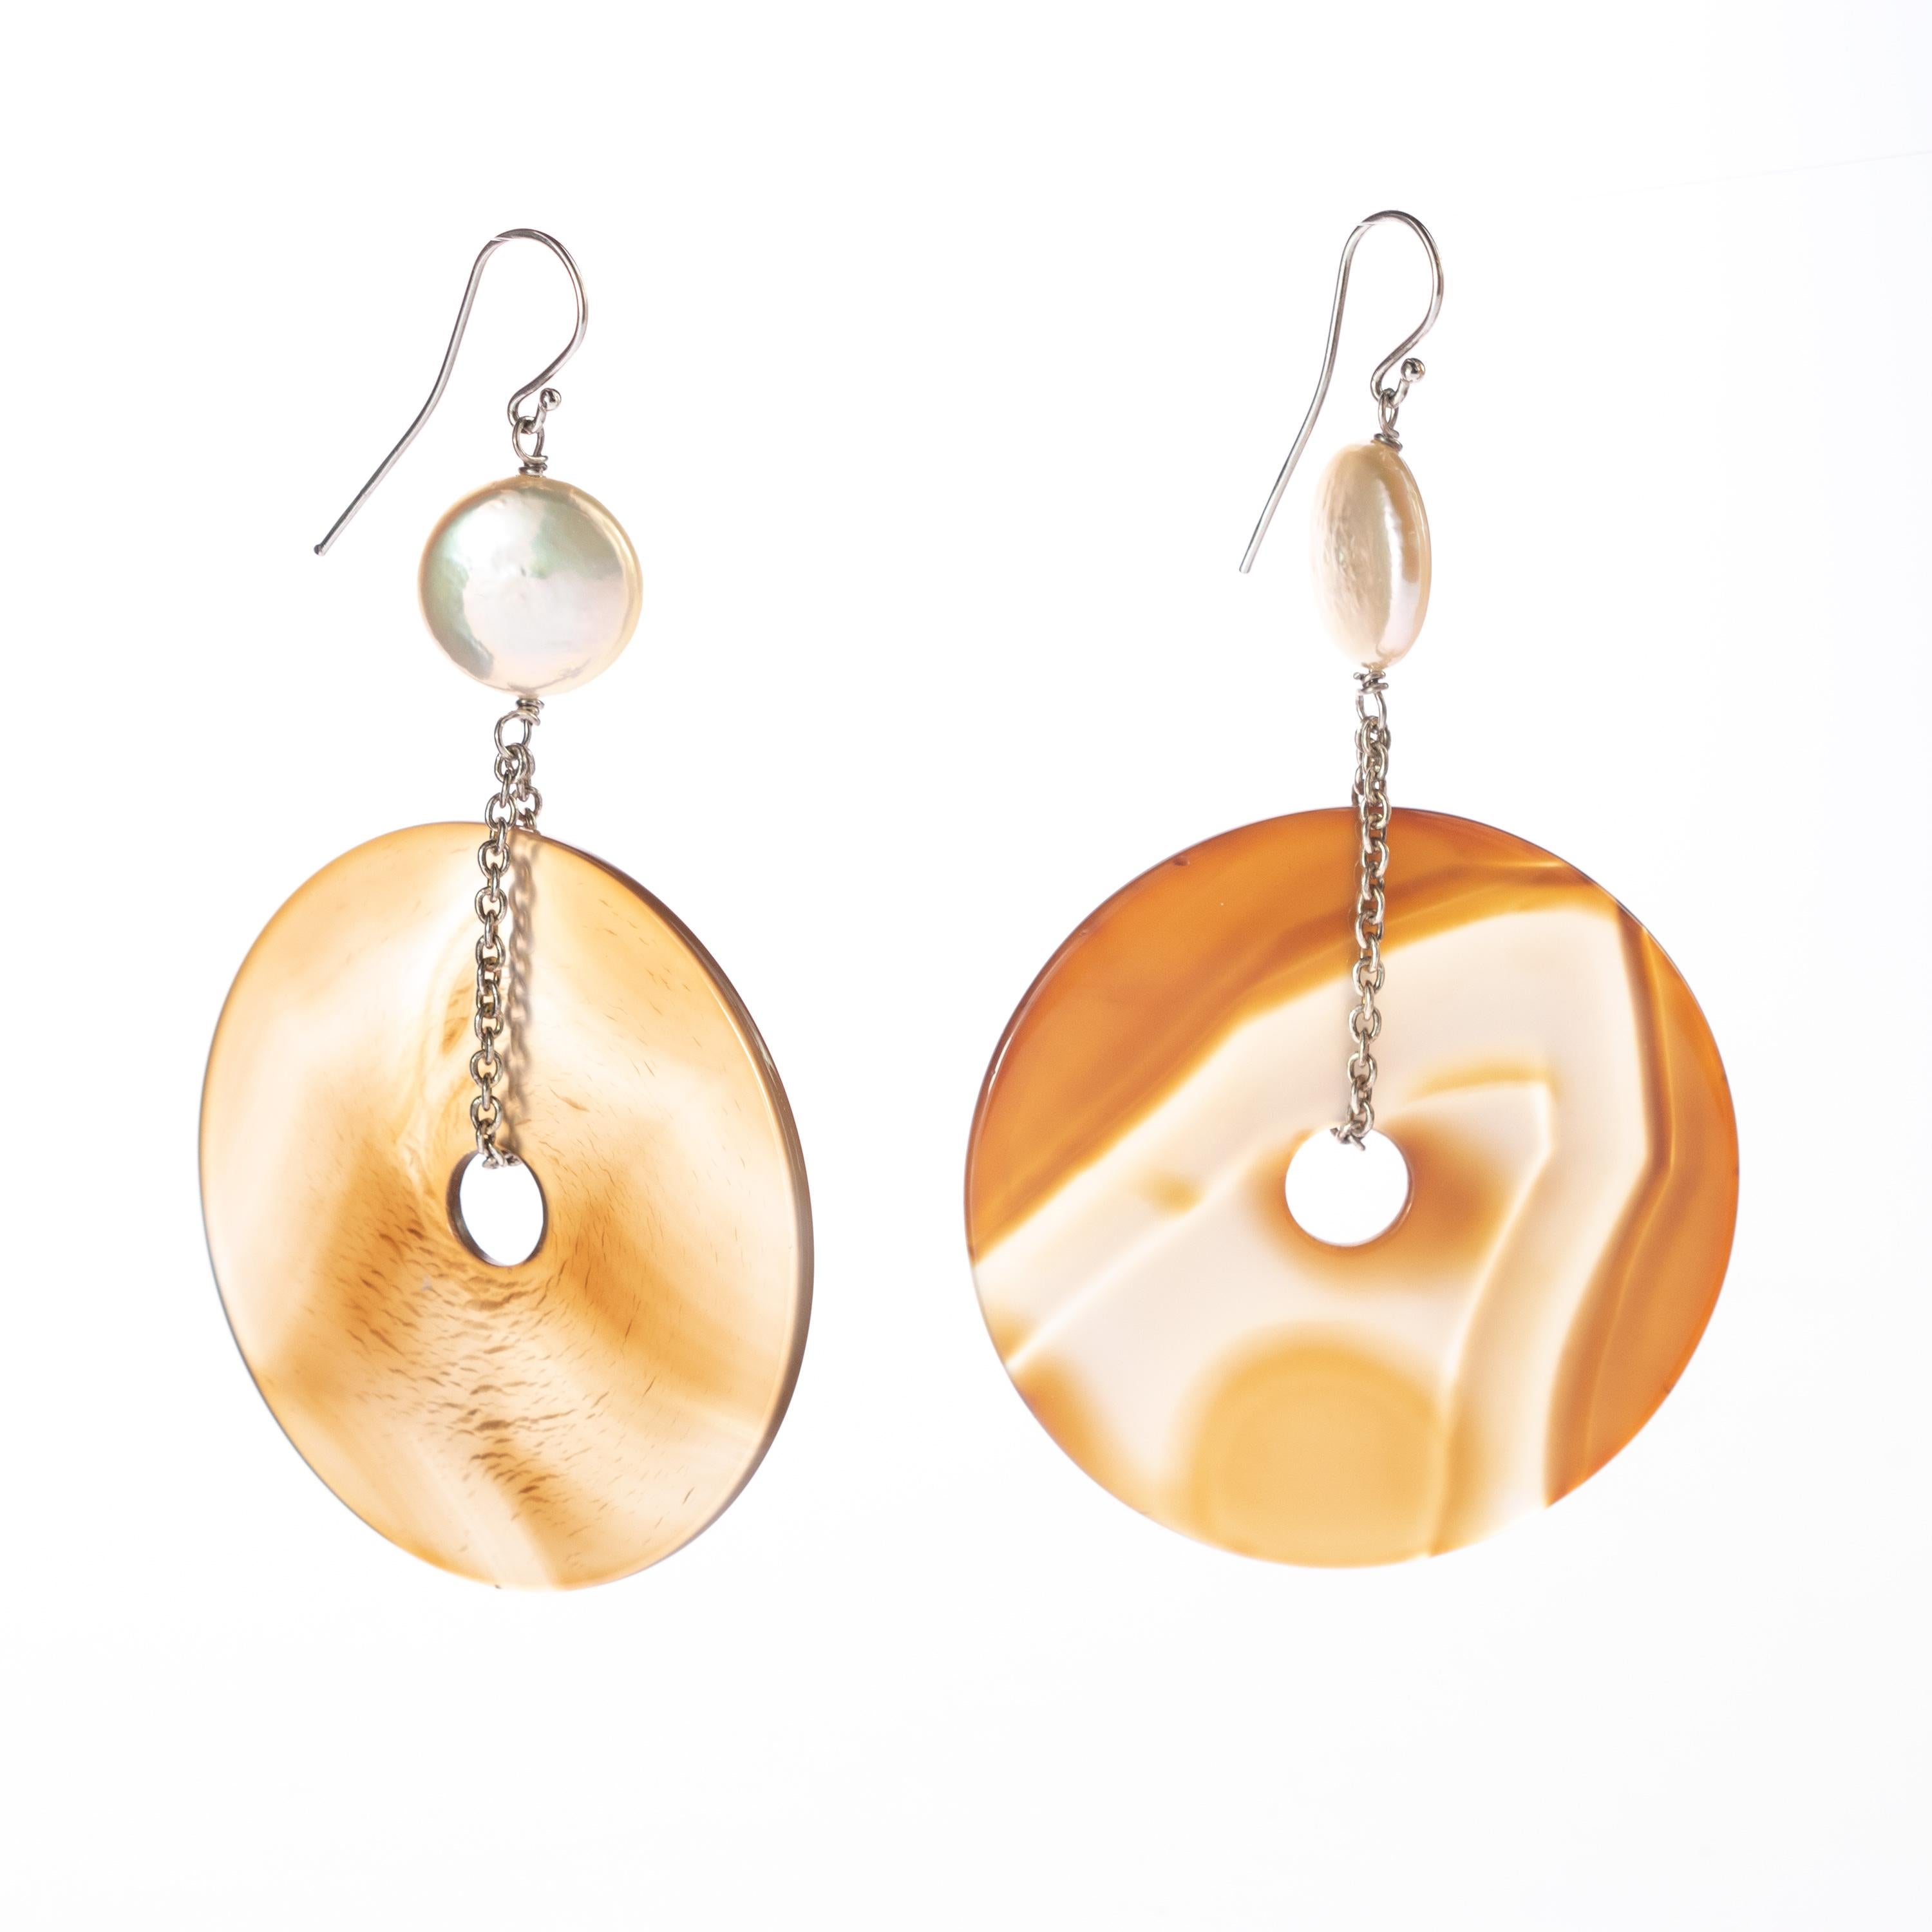 Circular brown donut-shaped agate with a sand-colored shade. A unique and modern piece designed with a vintage and elegant style. Dangle and long earrings with a delicate 925 sterling silver chain holding a round pearl.

Inspired in one of the